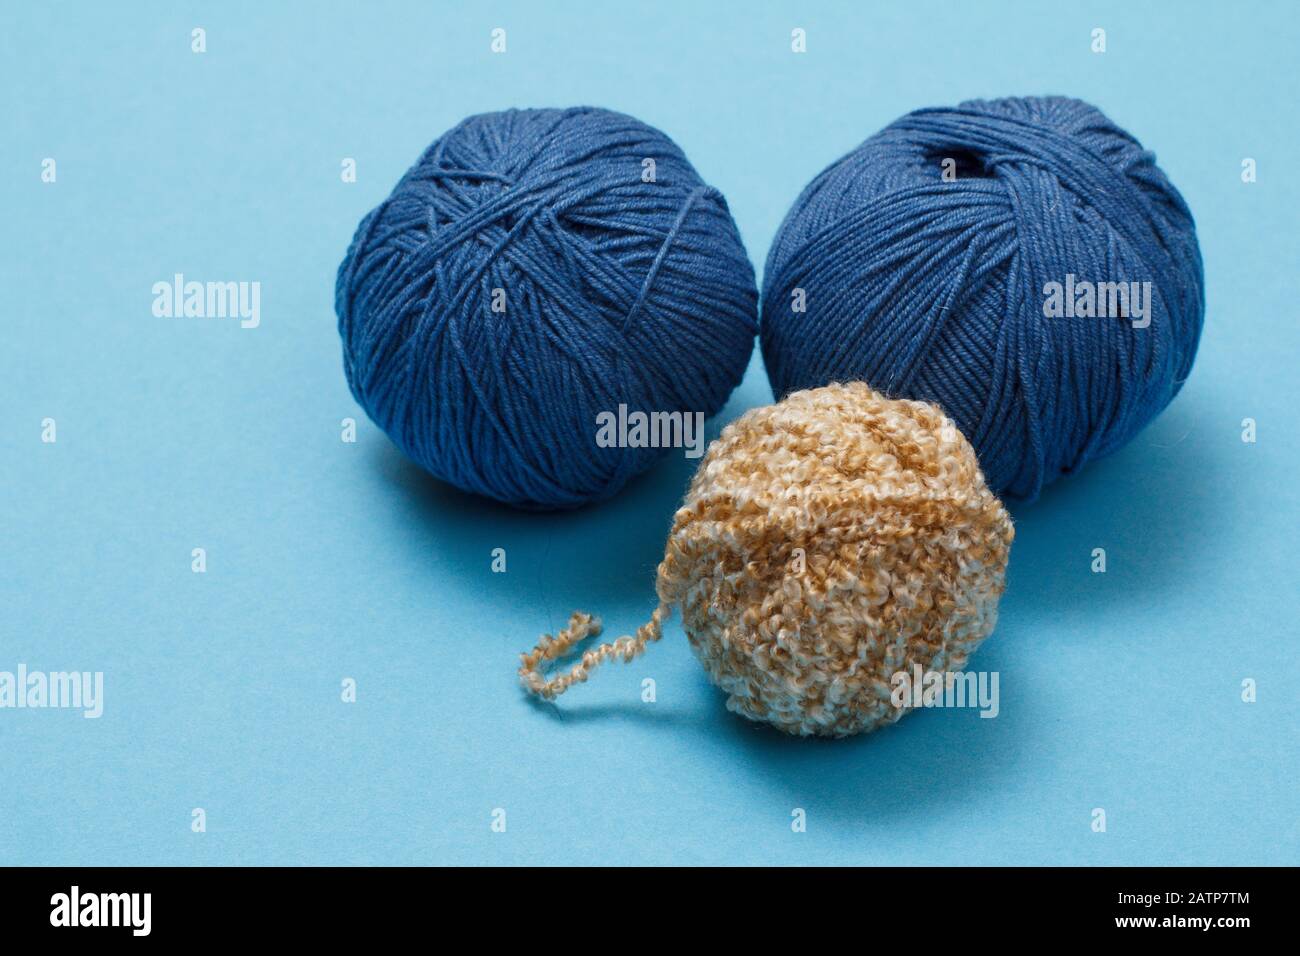 Knitting yarn balls on a blue background. Knitting concept. Top view. Stock Photo